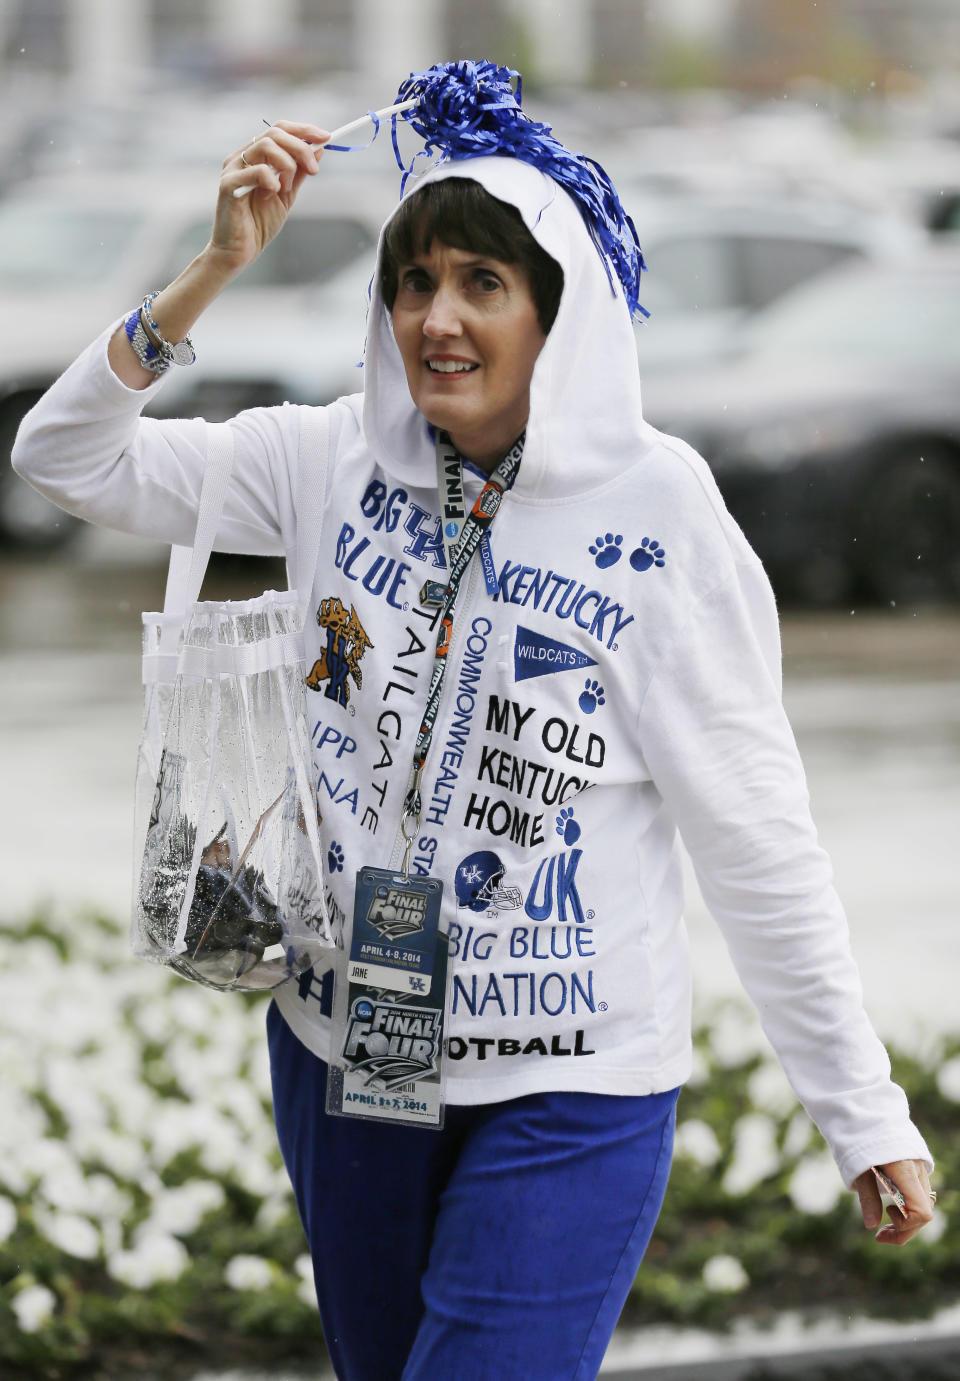 Jane Fletcher of Litchfield, Kentucky arrives for NCAA Final Four tournament college basketball semifinal games Saturday, April 5, 2014, in Dallas. (AP Photo/Charlie Neibergall)